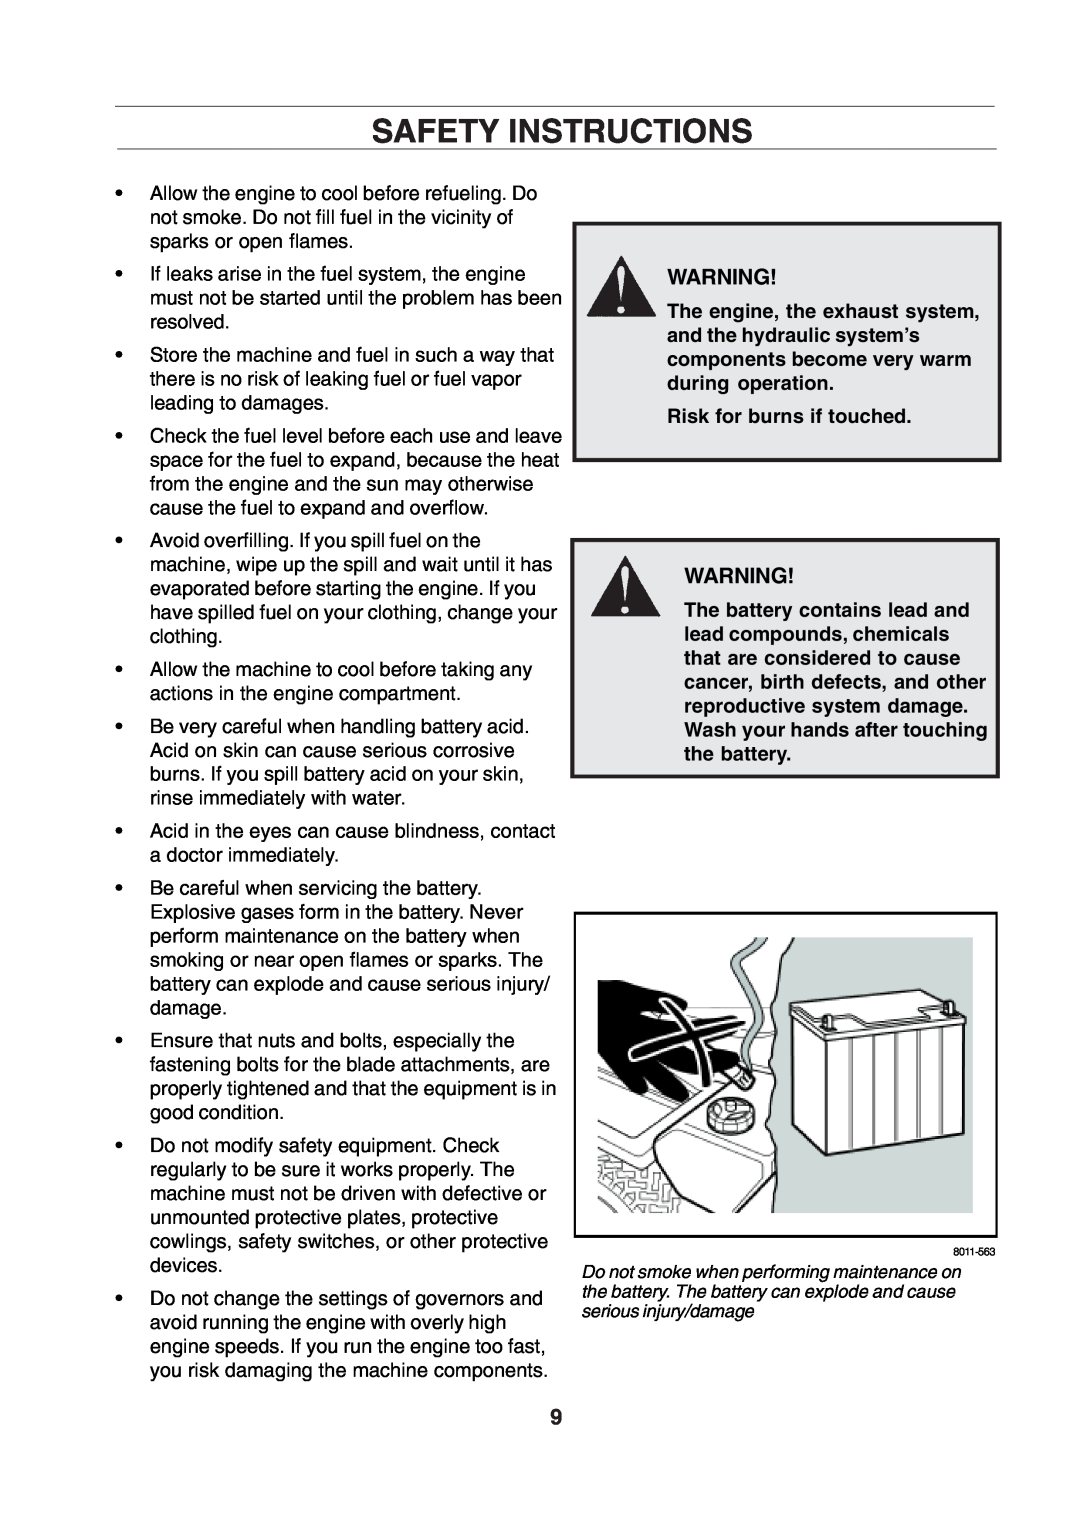 Husqvarna CZE 4818 manual Safety Instructions, Risk for burns if touched 